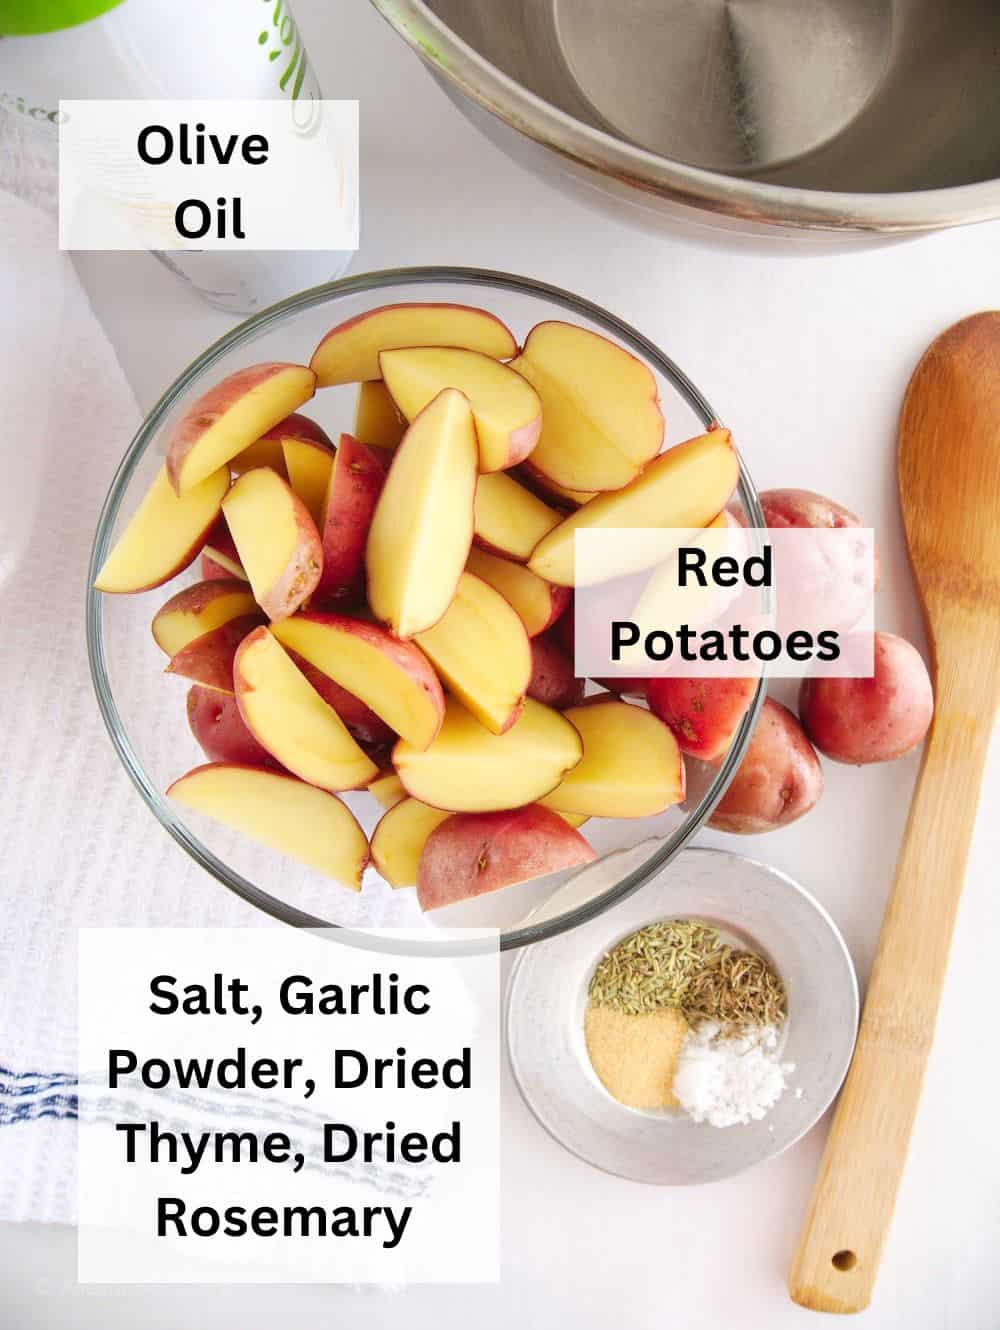 A clear glass bowl of quartered red potatoes next to a smaller glass bowl of spices.